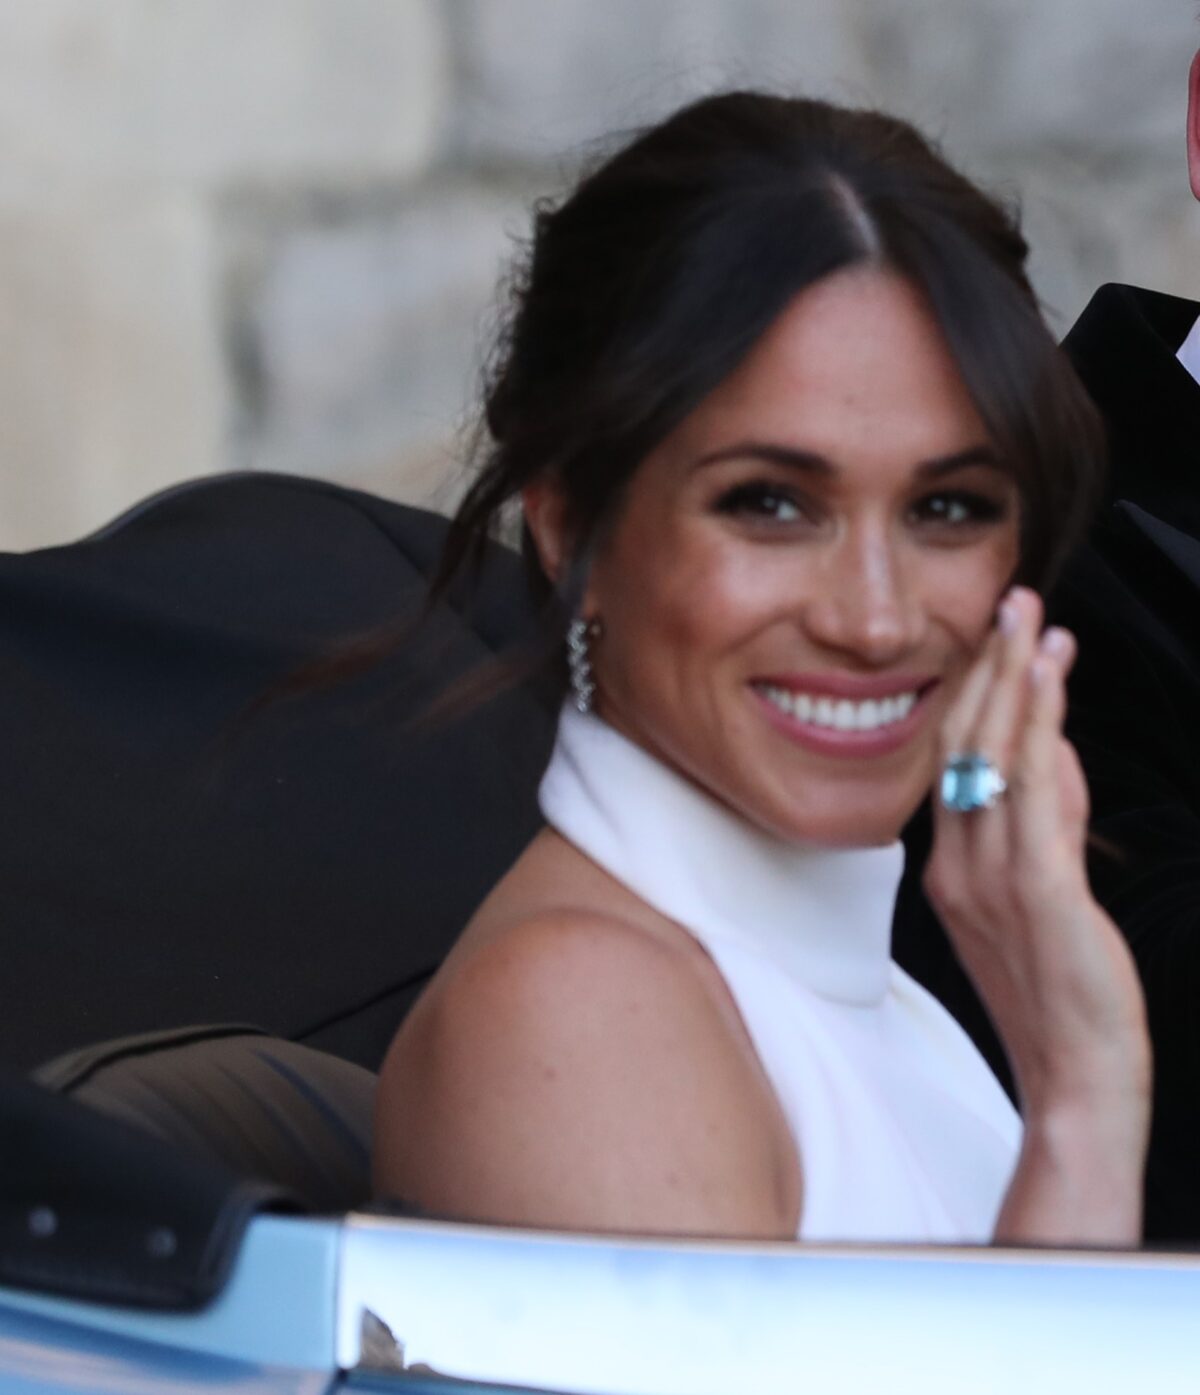 Meghan Markle wearing an aquamarine ring that once belonged to Princess Diana as she heads to her and Prince Harry's wedding reception